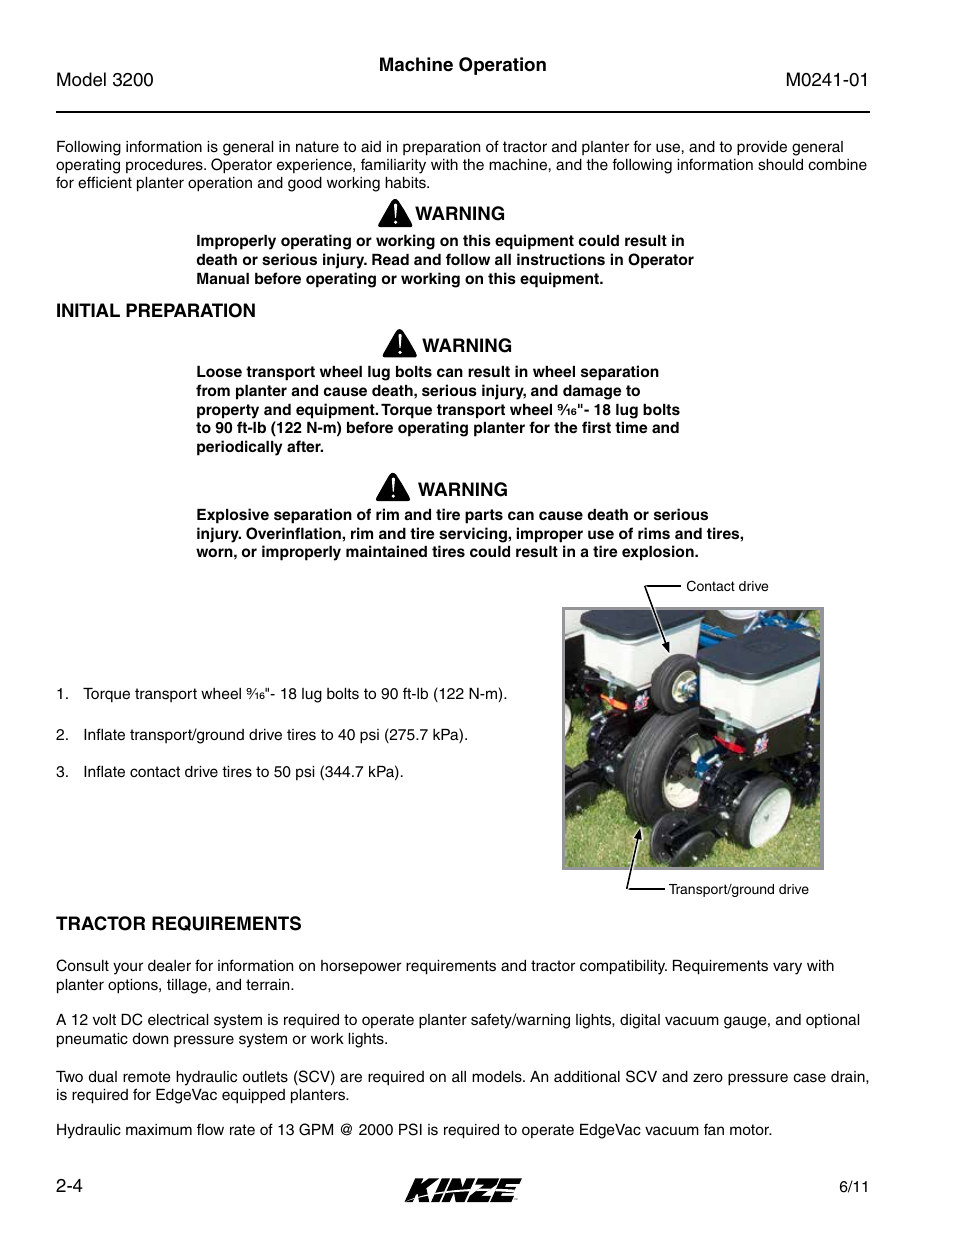 Initial preparation, Tractor requirements, Initial preparation -4 | Tractor requirements -4 | Kinze 3200 Wing-Fold Planter Rev. 7/14 User Manual | Page 16 / 192